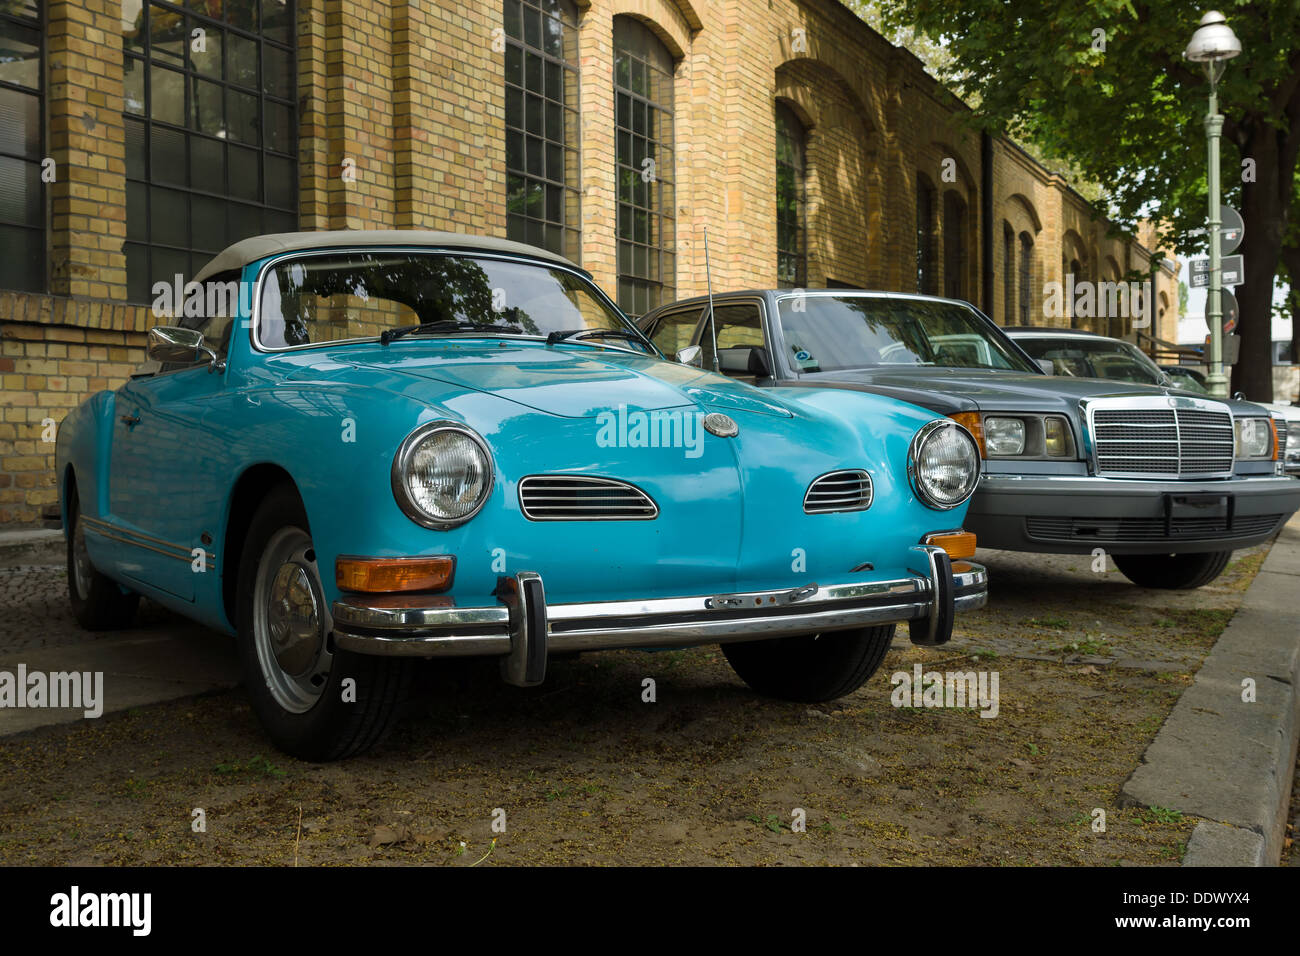 Car Volkswagen Karmann Ghia (foreground) and the Mercedes-Benz W201 (background) Stock Photo